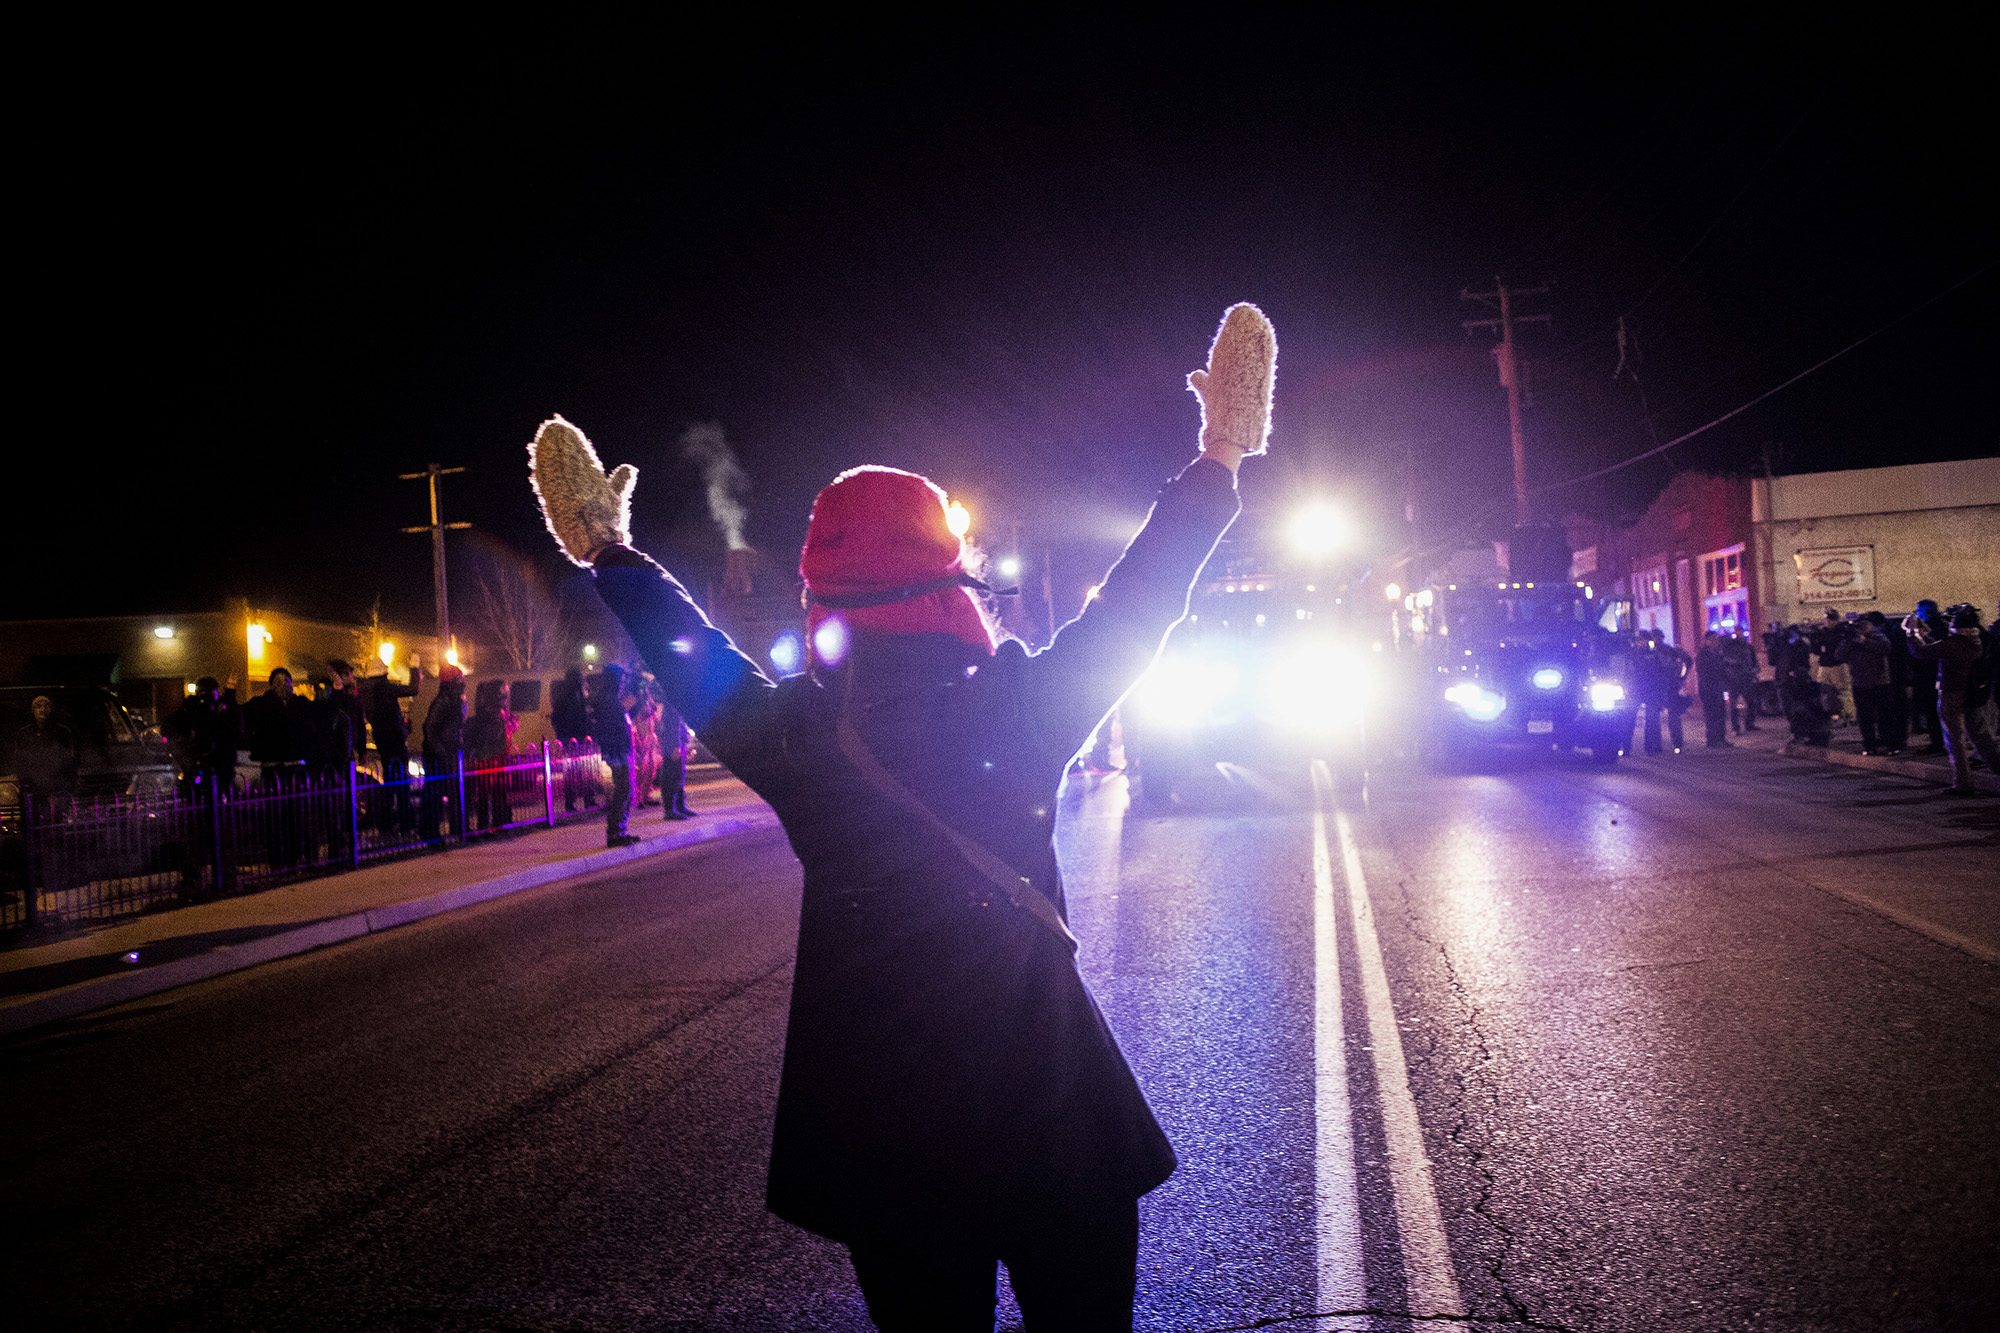  A protester stands in front of authorities saying "hands up, don't shoot" on Nov. 25, 2014 in Ferguson, MO. 